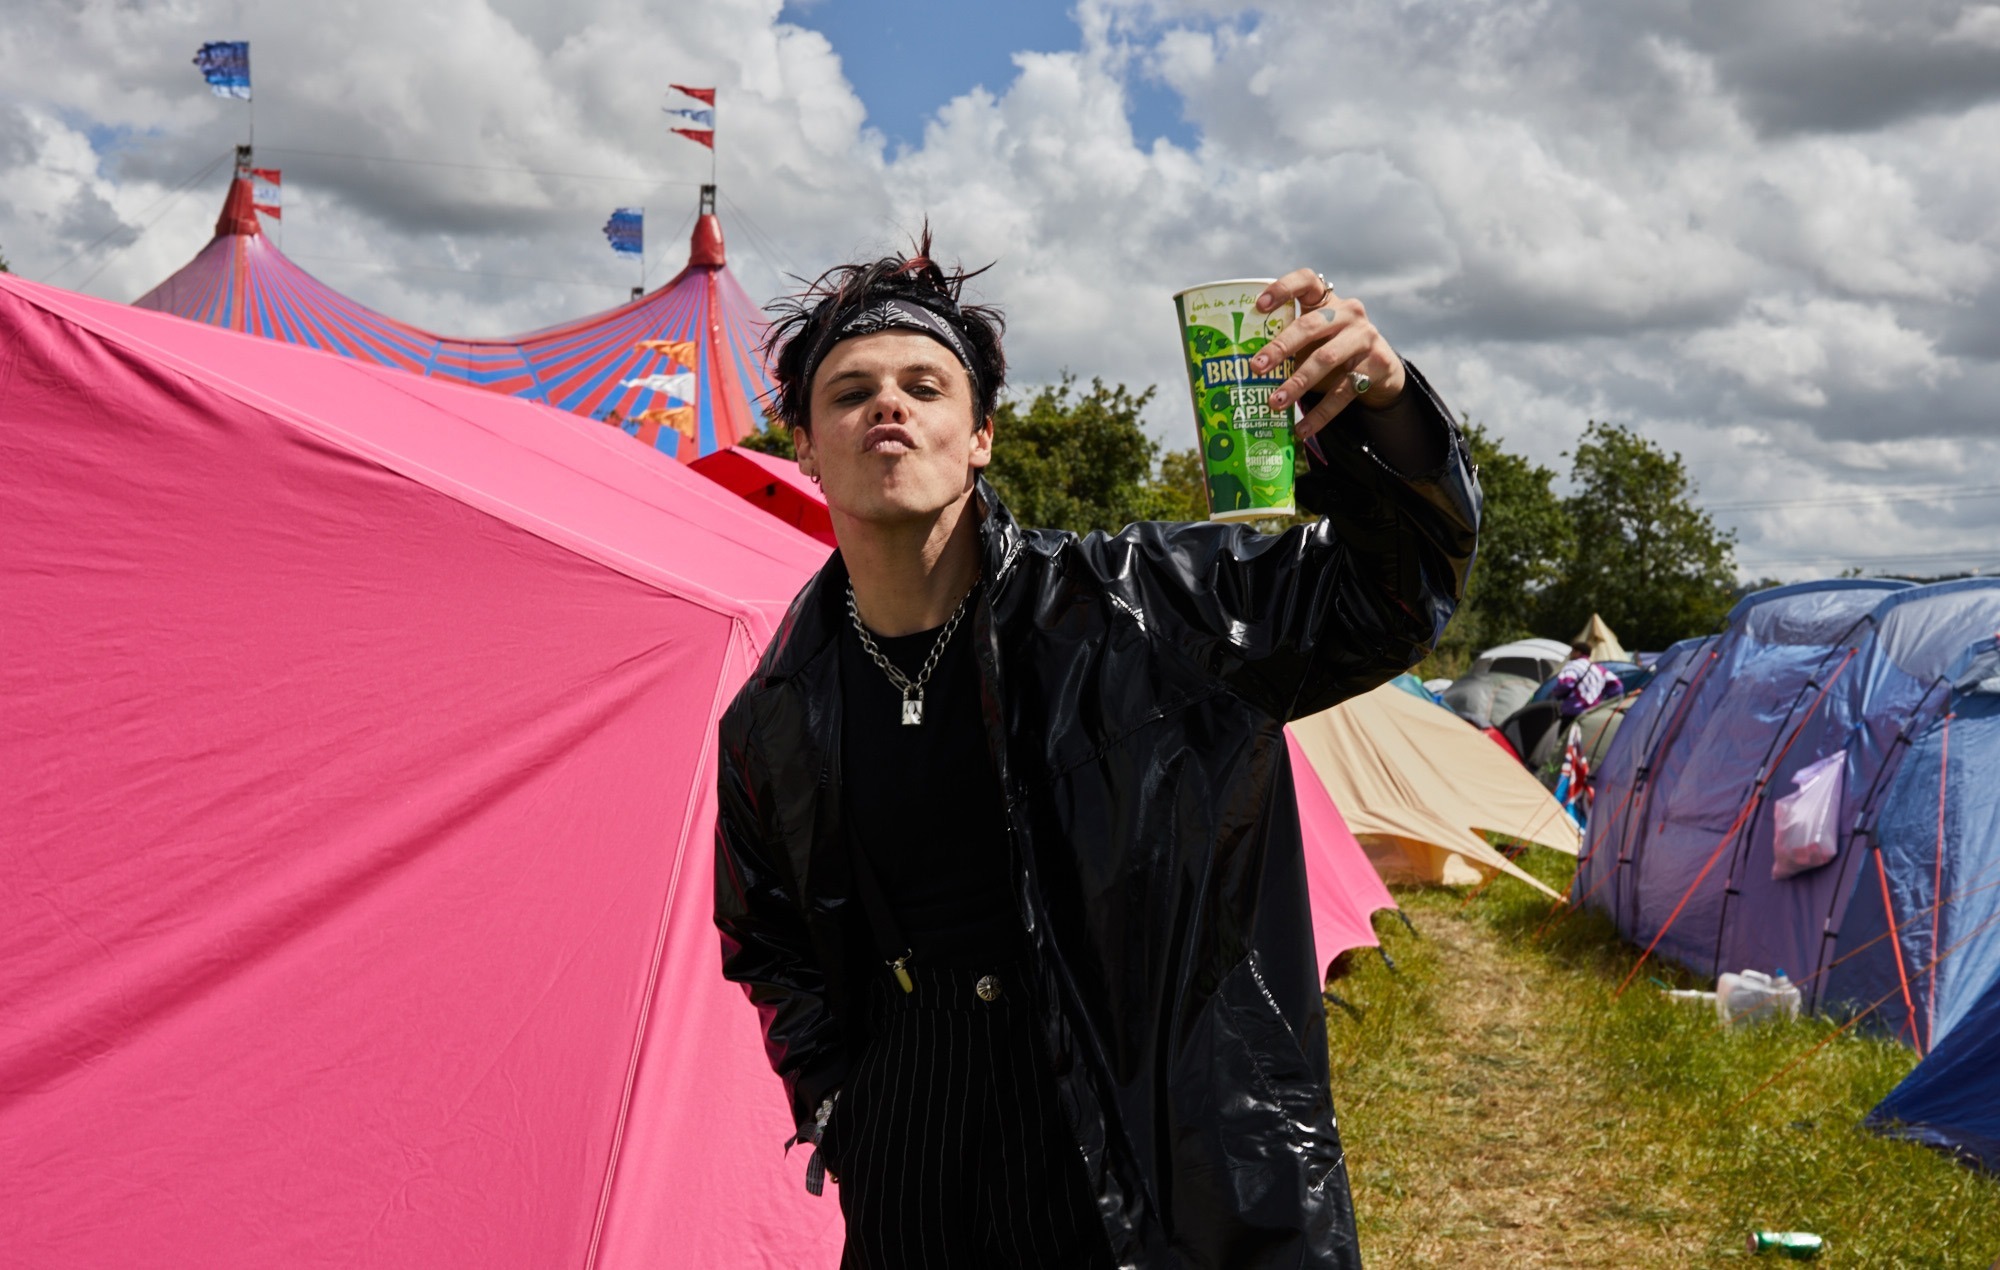 Yungblud at Glastonbury 2022: “Mick Jagger said he liked my energy”